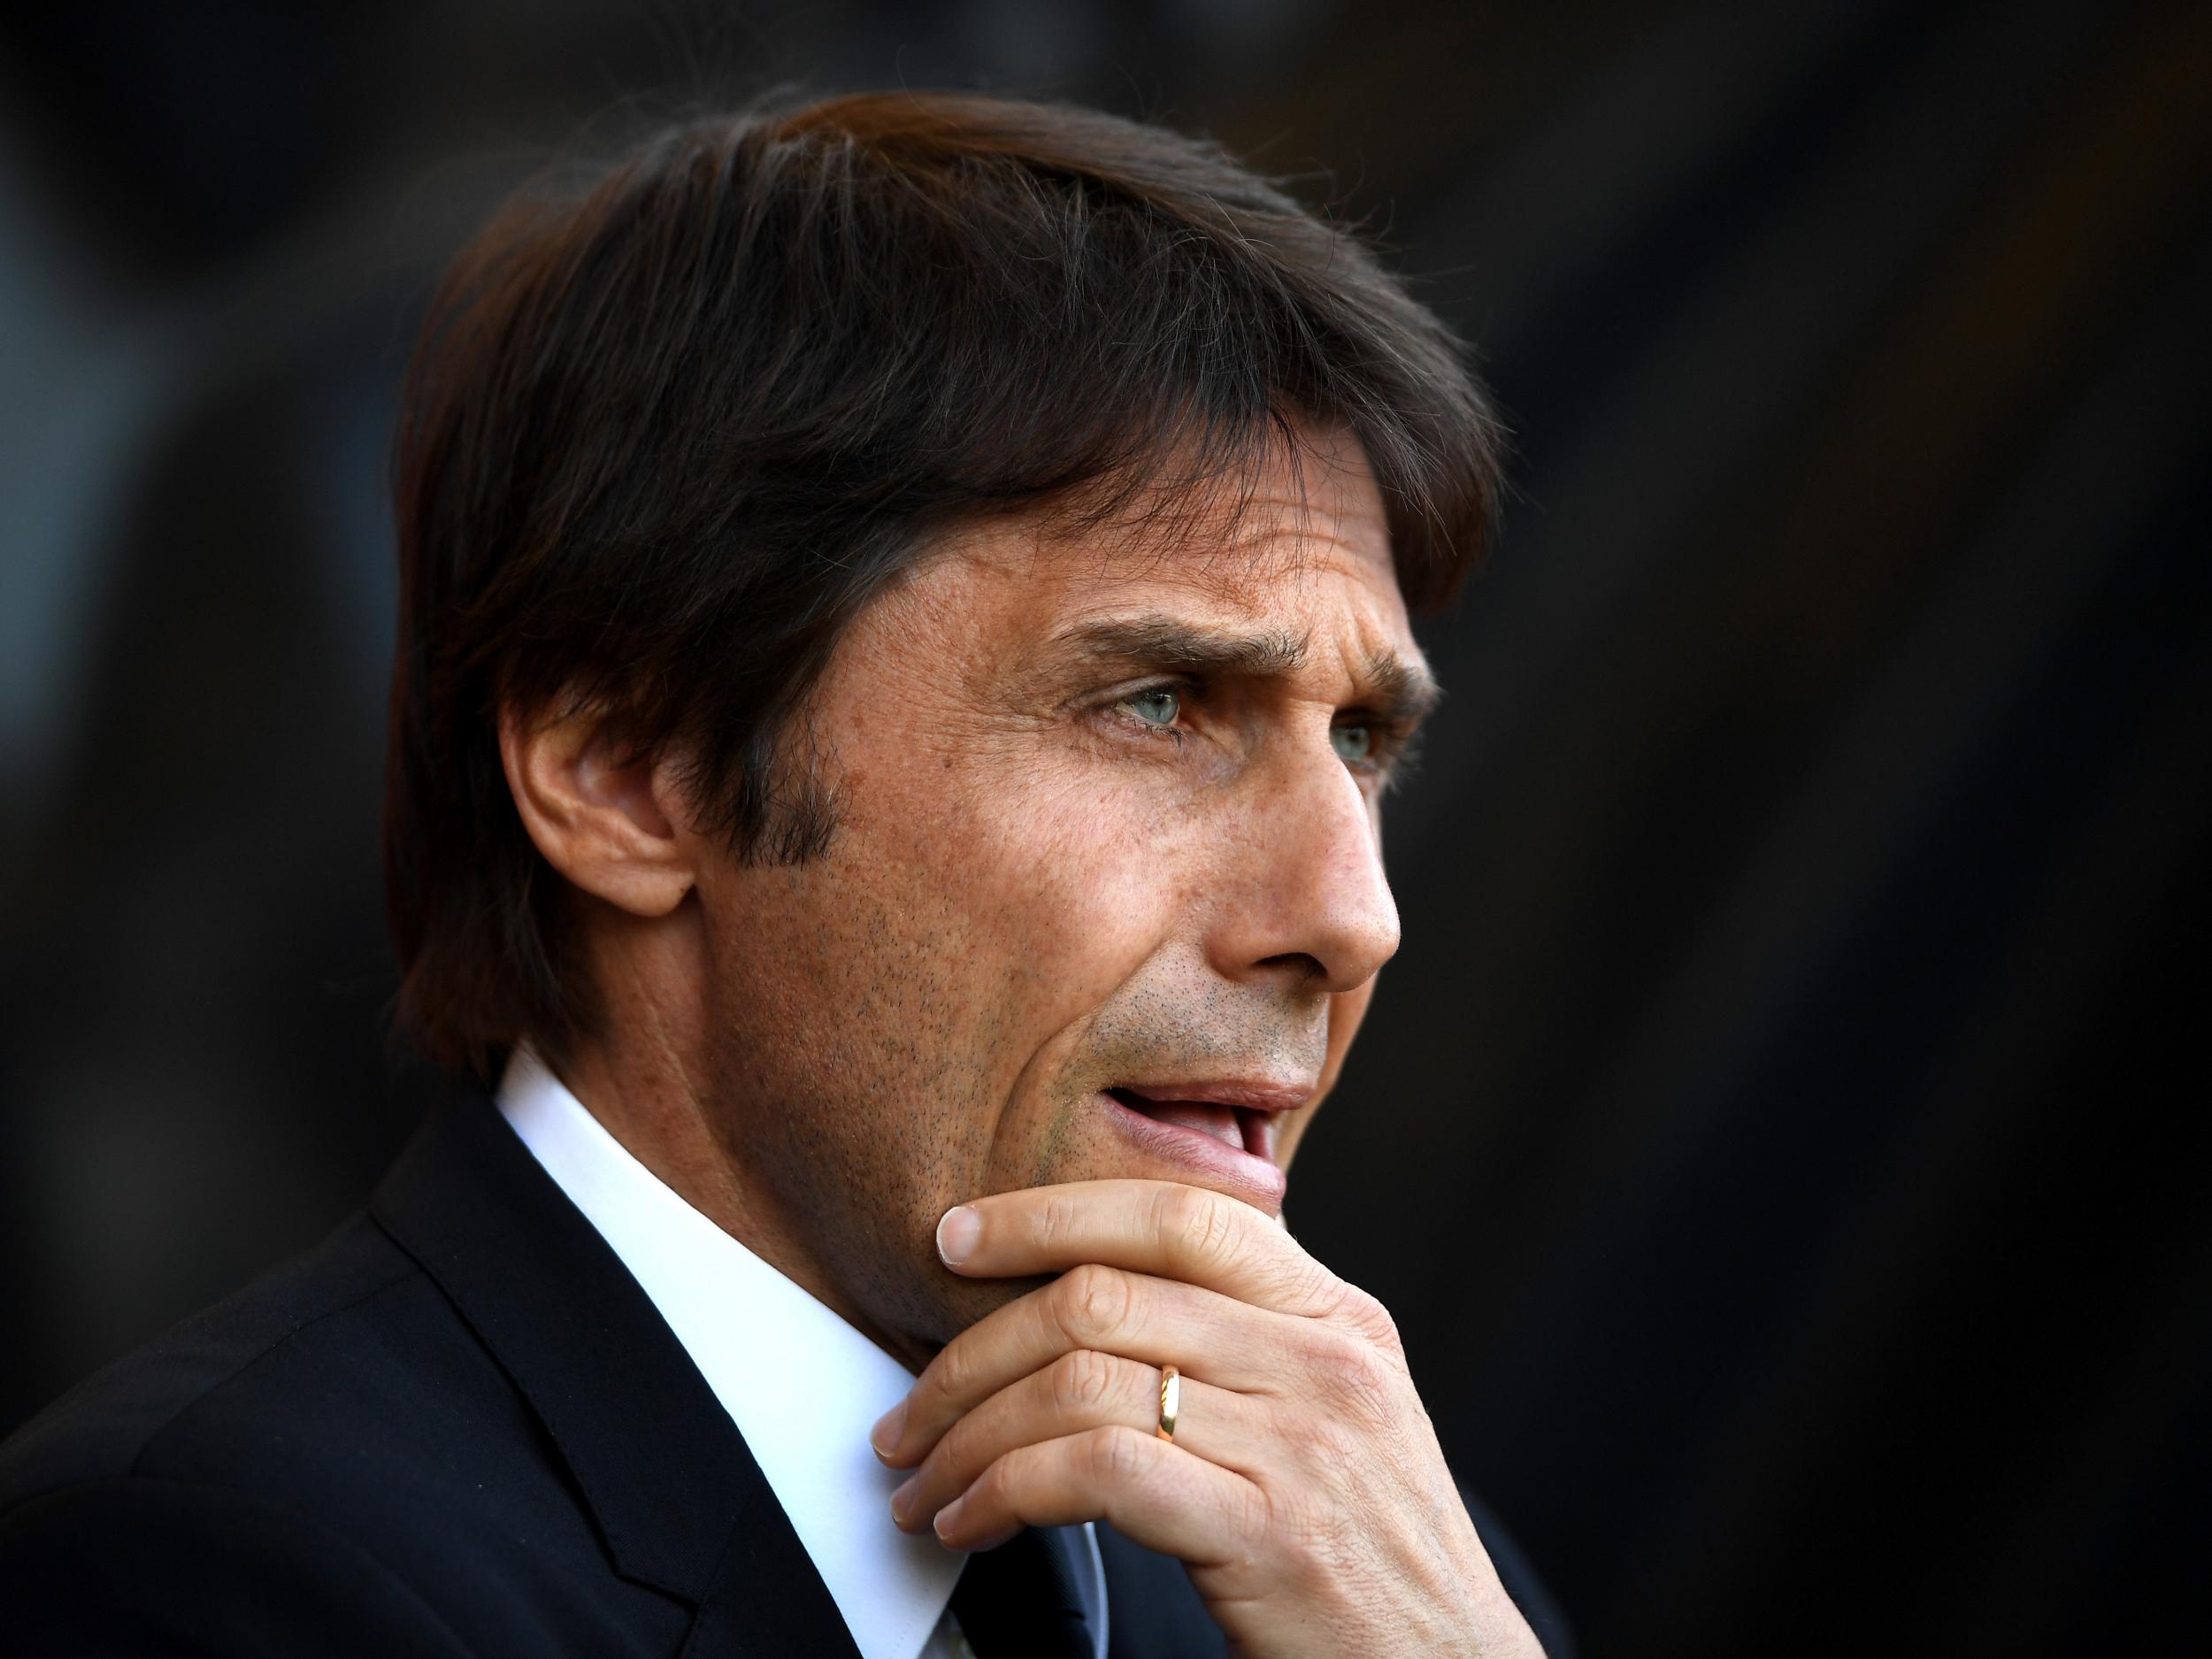 &#13;
Chelsea considered Conte and Sampaoli - both like energetic play and a back three &#13;